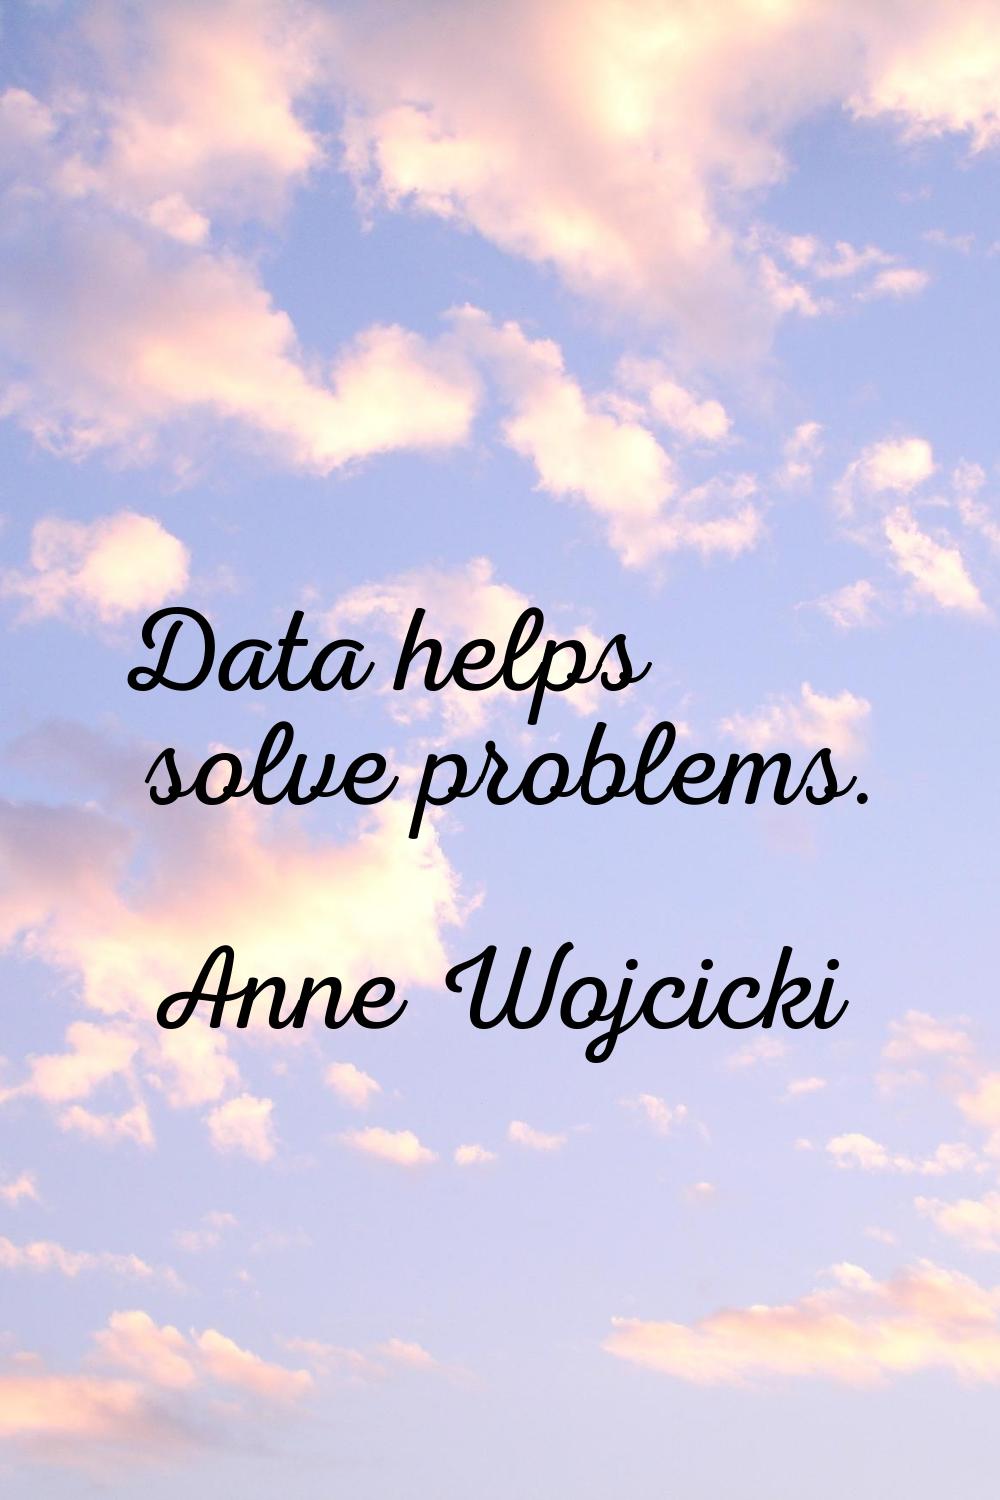 Data helps solve problems.